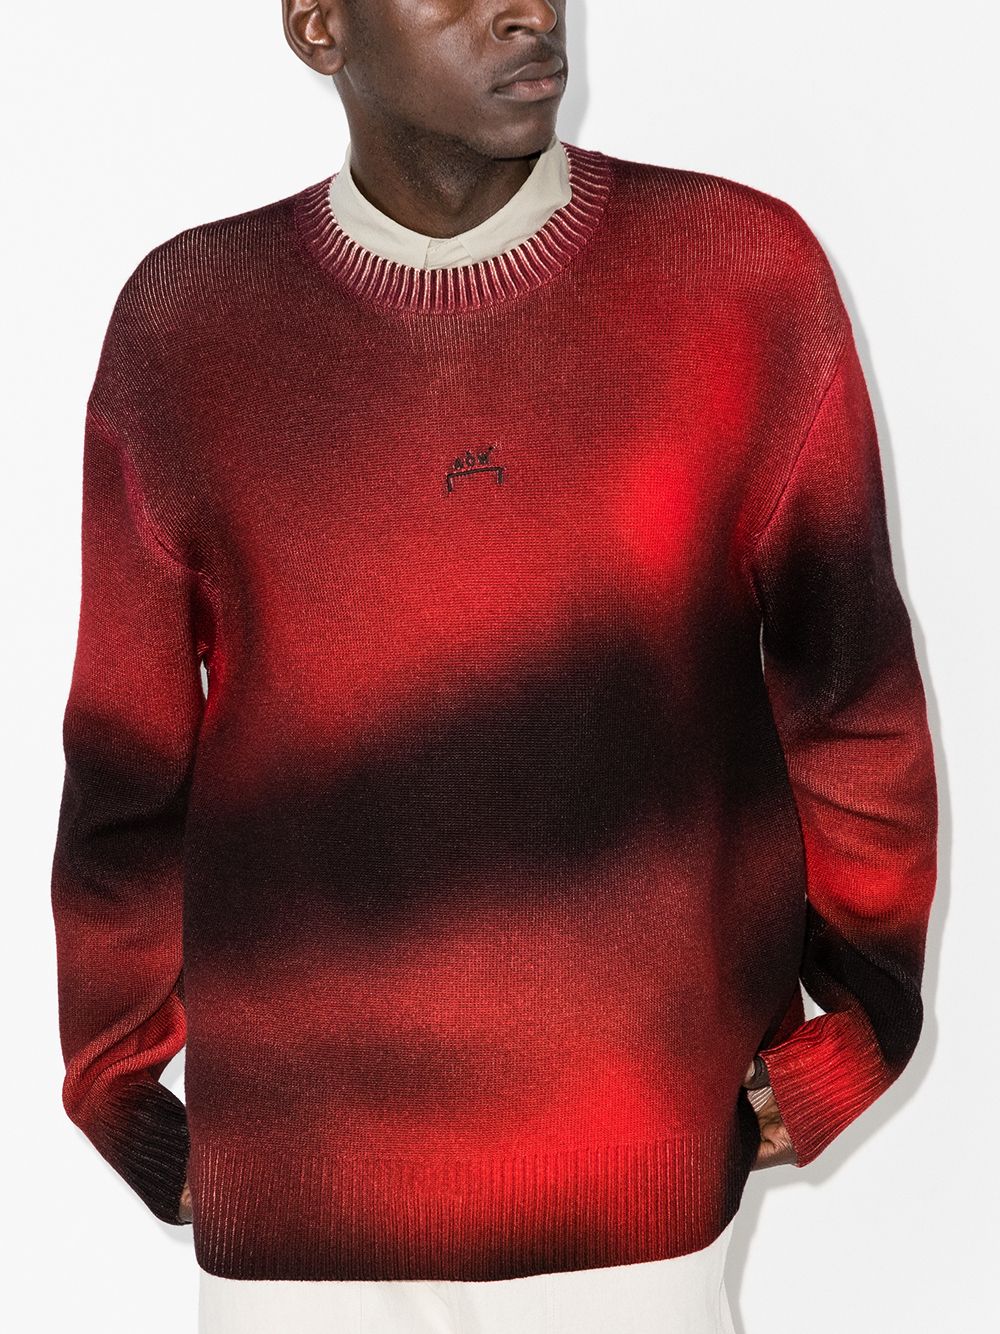 A-COLD-WALL* Sweater met print - Rood